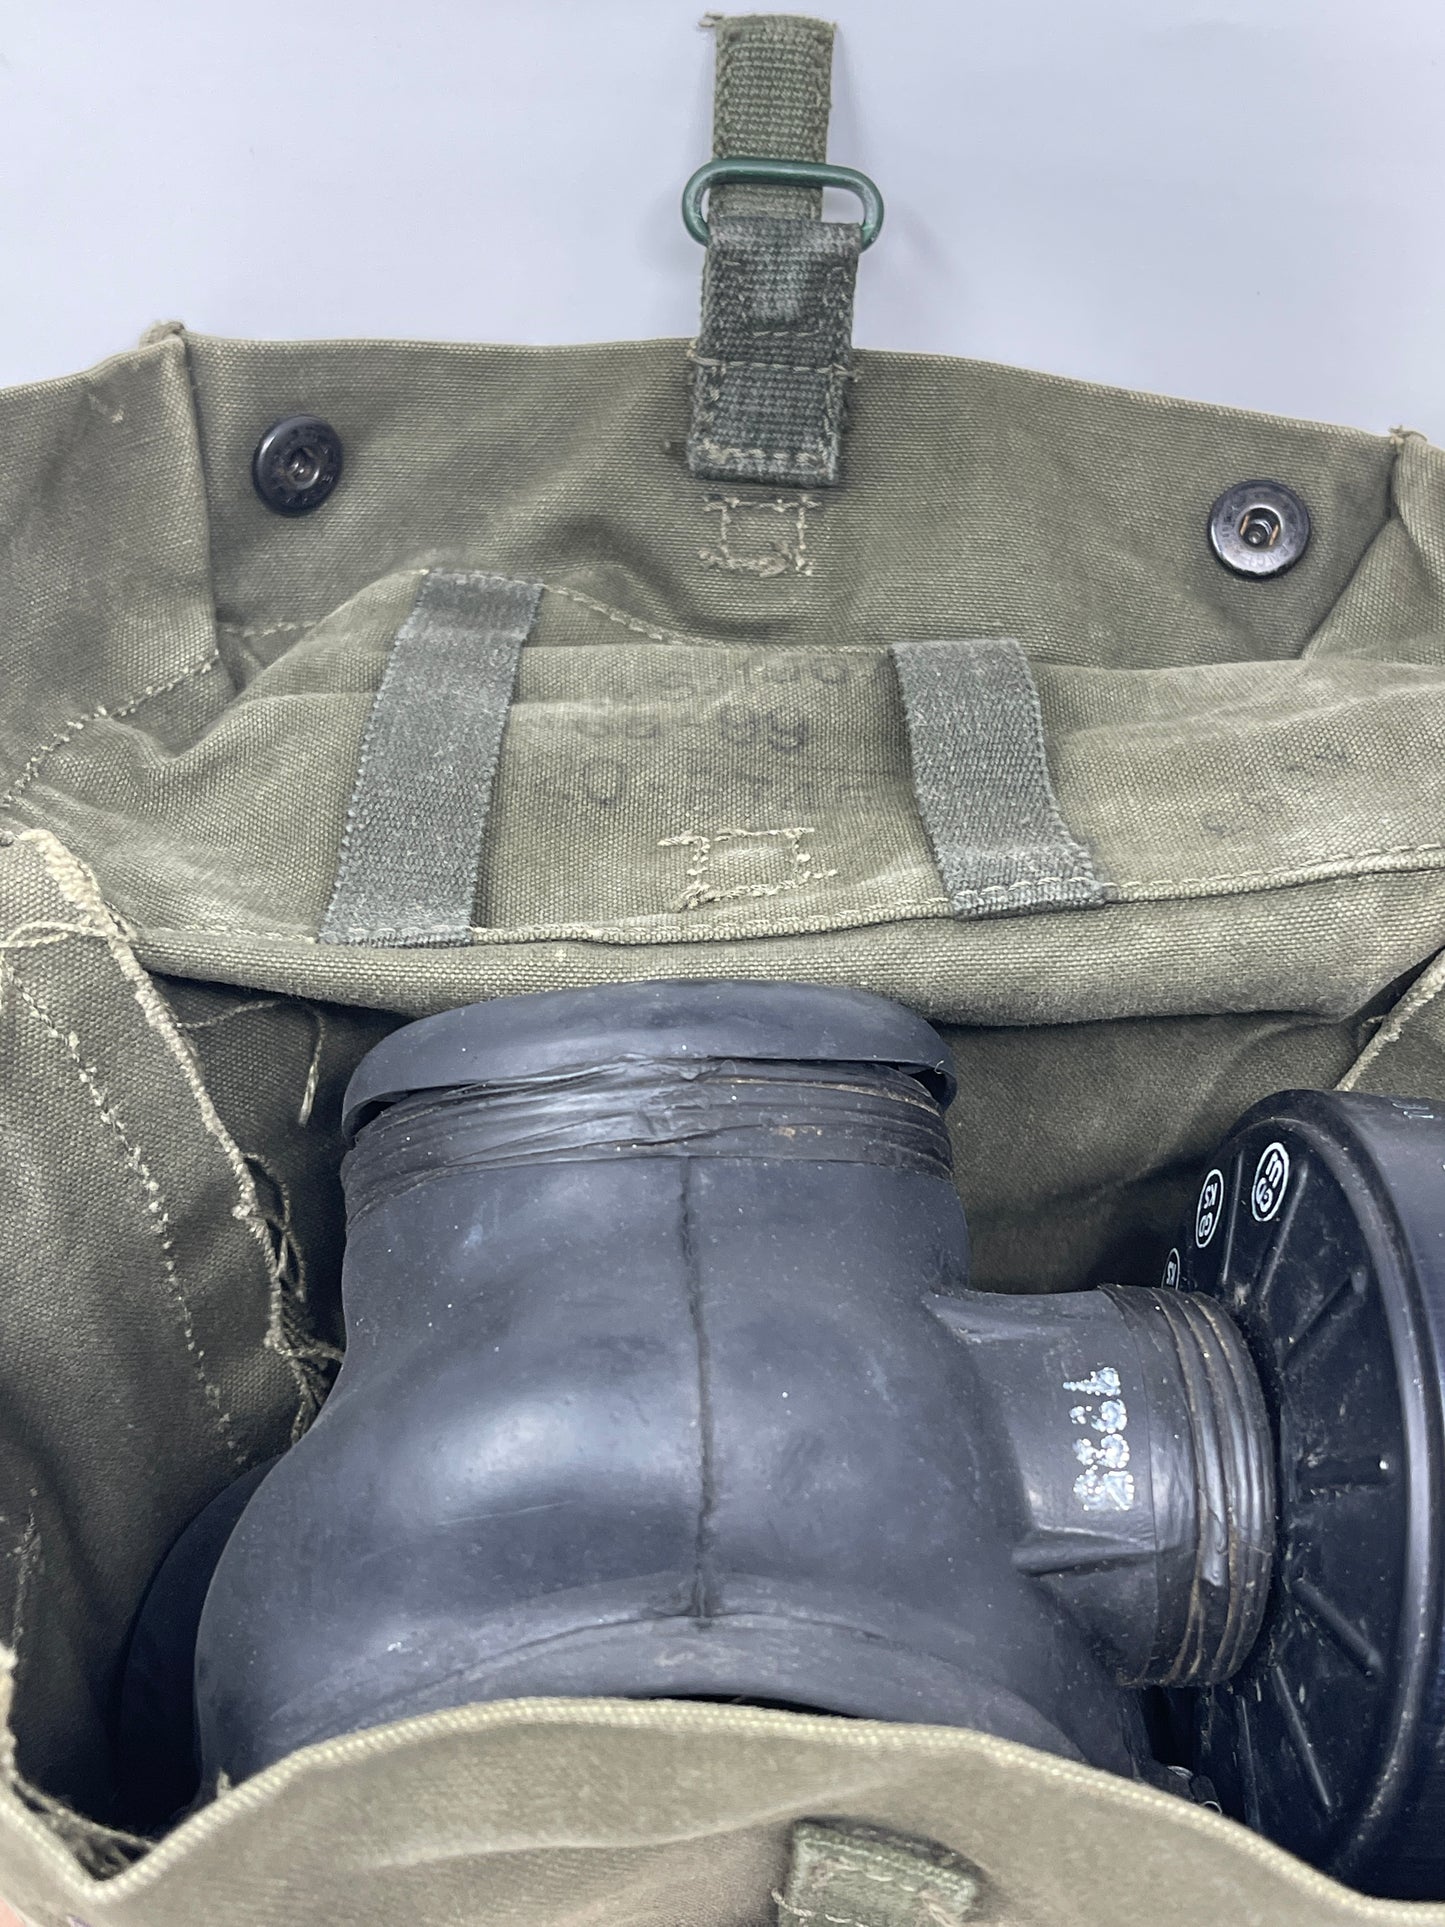 image shows inside of 1960's British Army S6 Gas Mask & Haversack showing S6 respirator next to bag